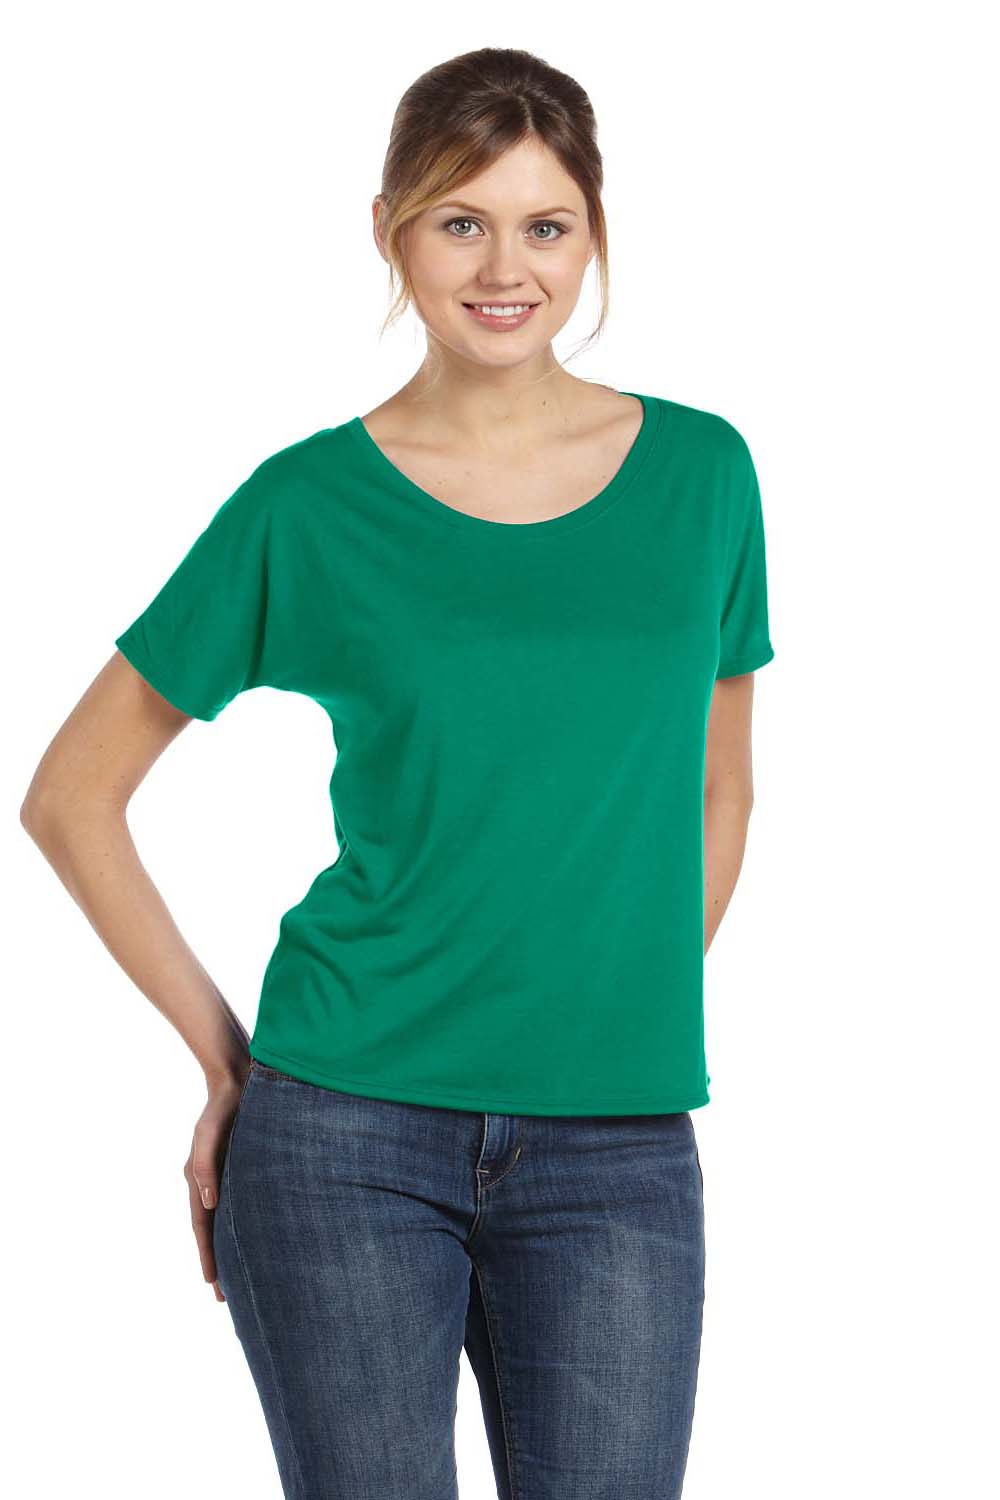 Bella + Canvas 8816 Womens Slouchy Short Sleeve Wide Neck T-Shirt Kelly Green Front